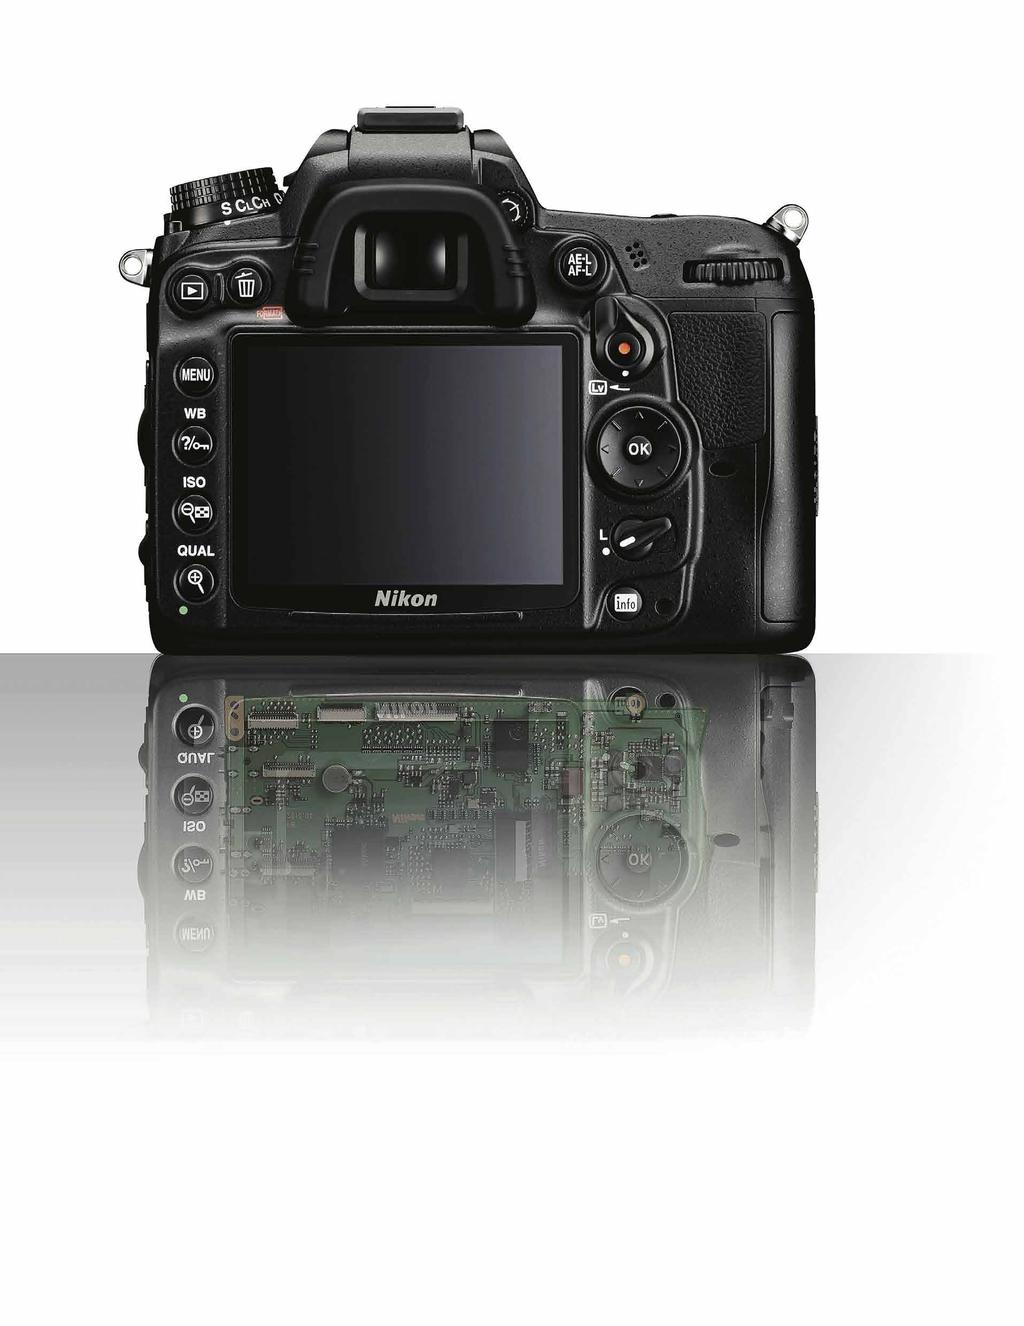 size that keeps you shooting to shoot both stills and movies, the D7000 s D-Movie capabilities now include full HD 1080p capture with full-time autofocus and manual exposure.